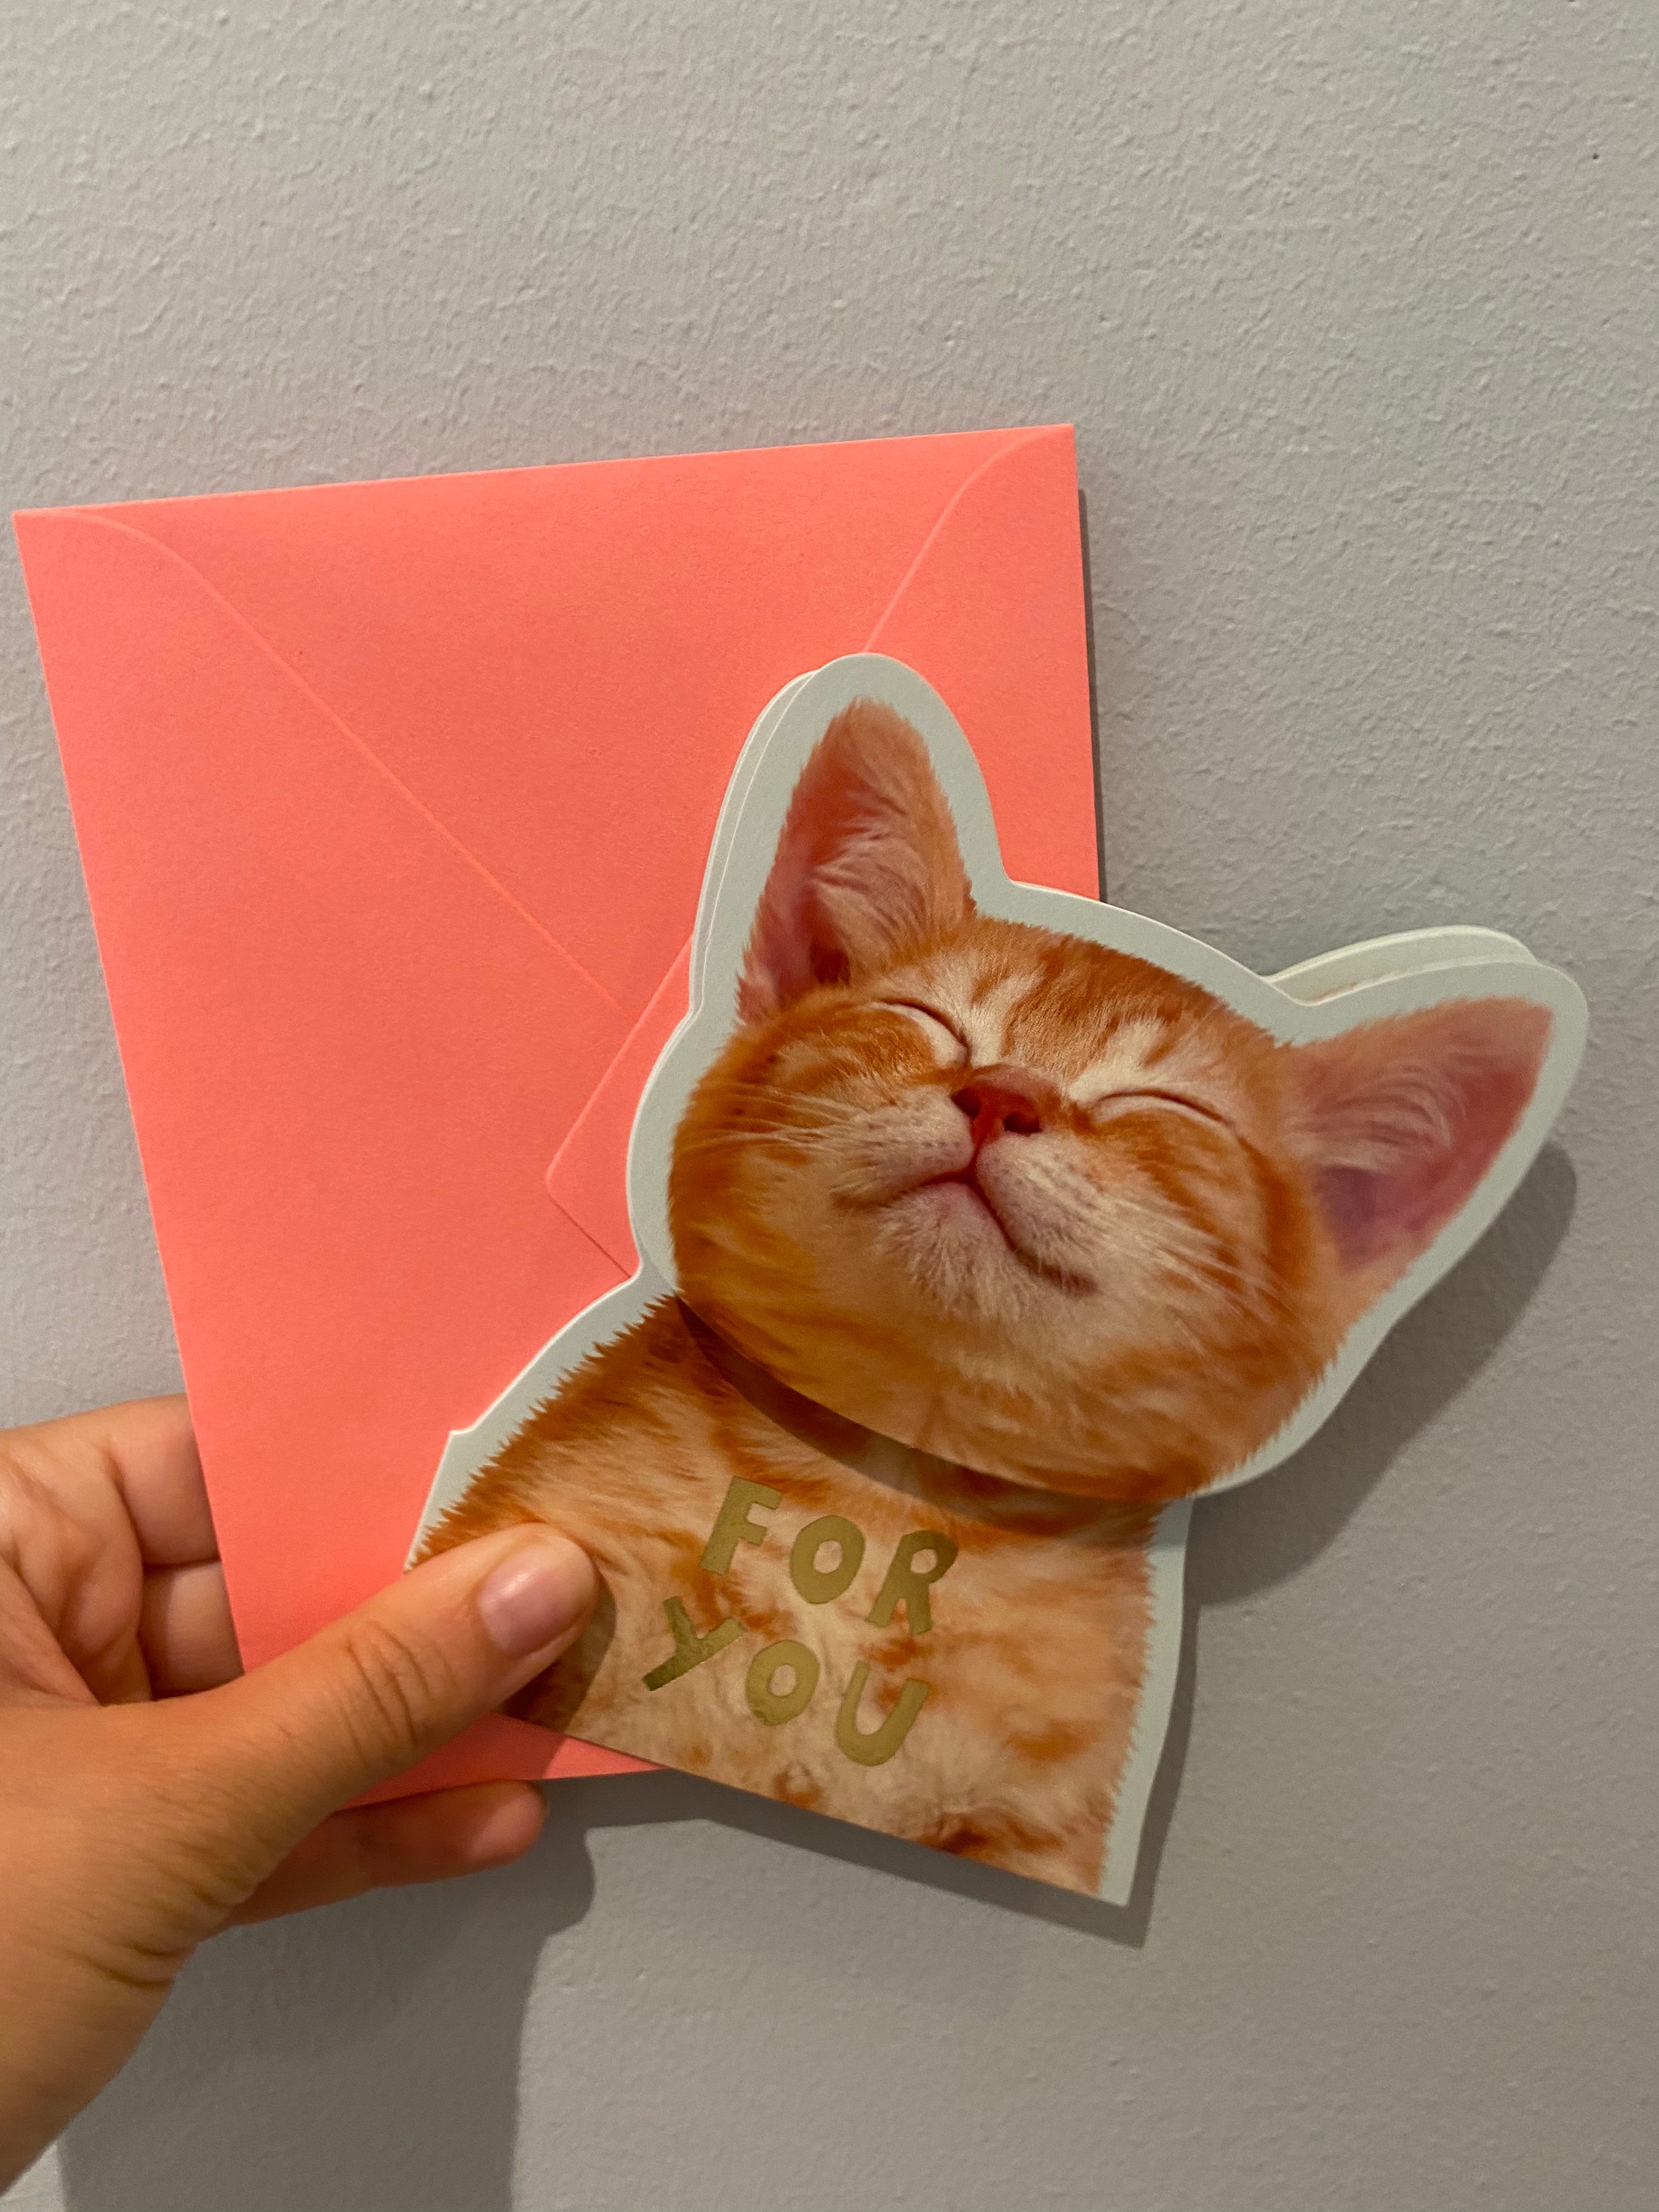 Pop-up card with cat "for you"